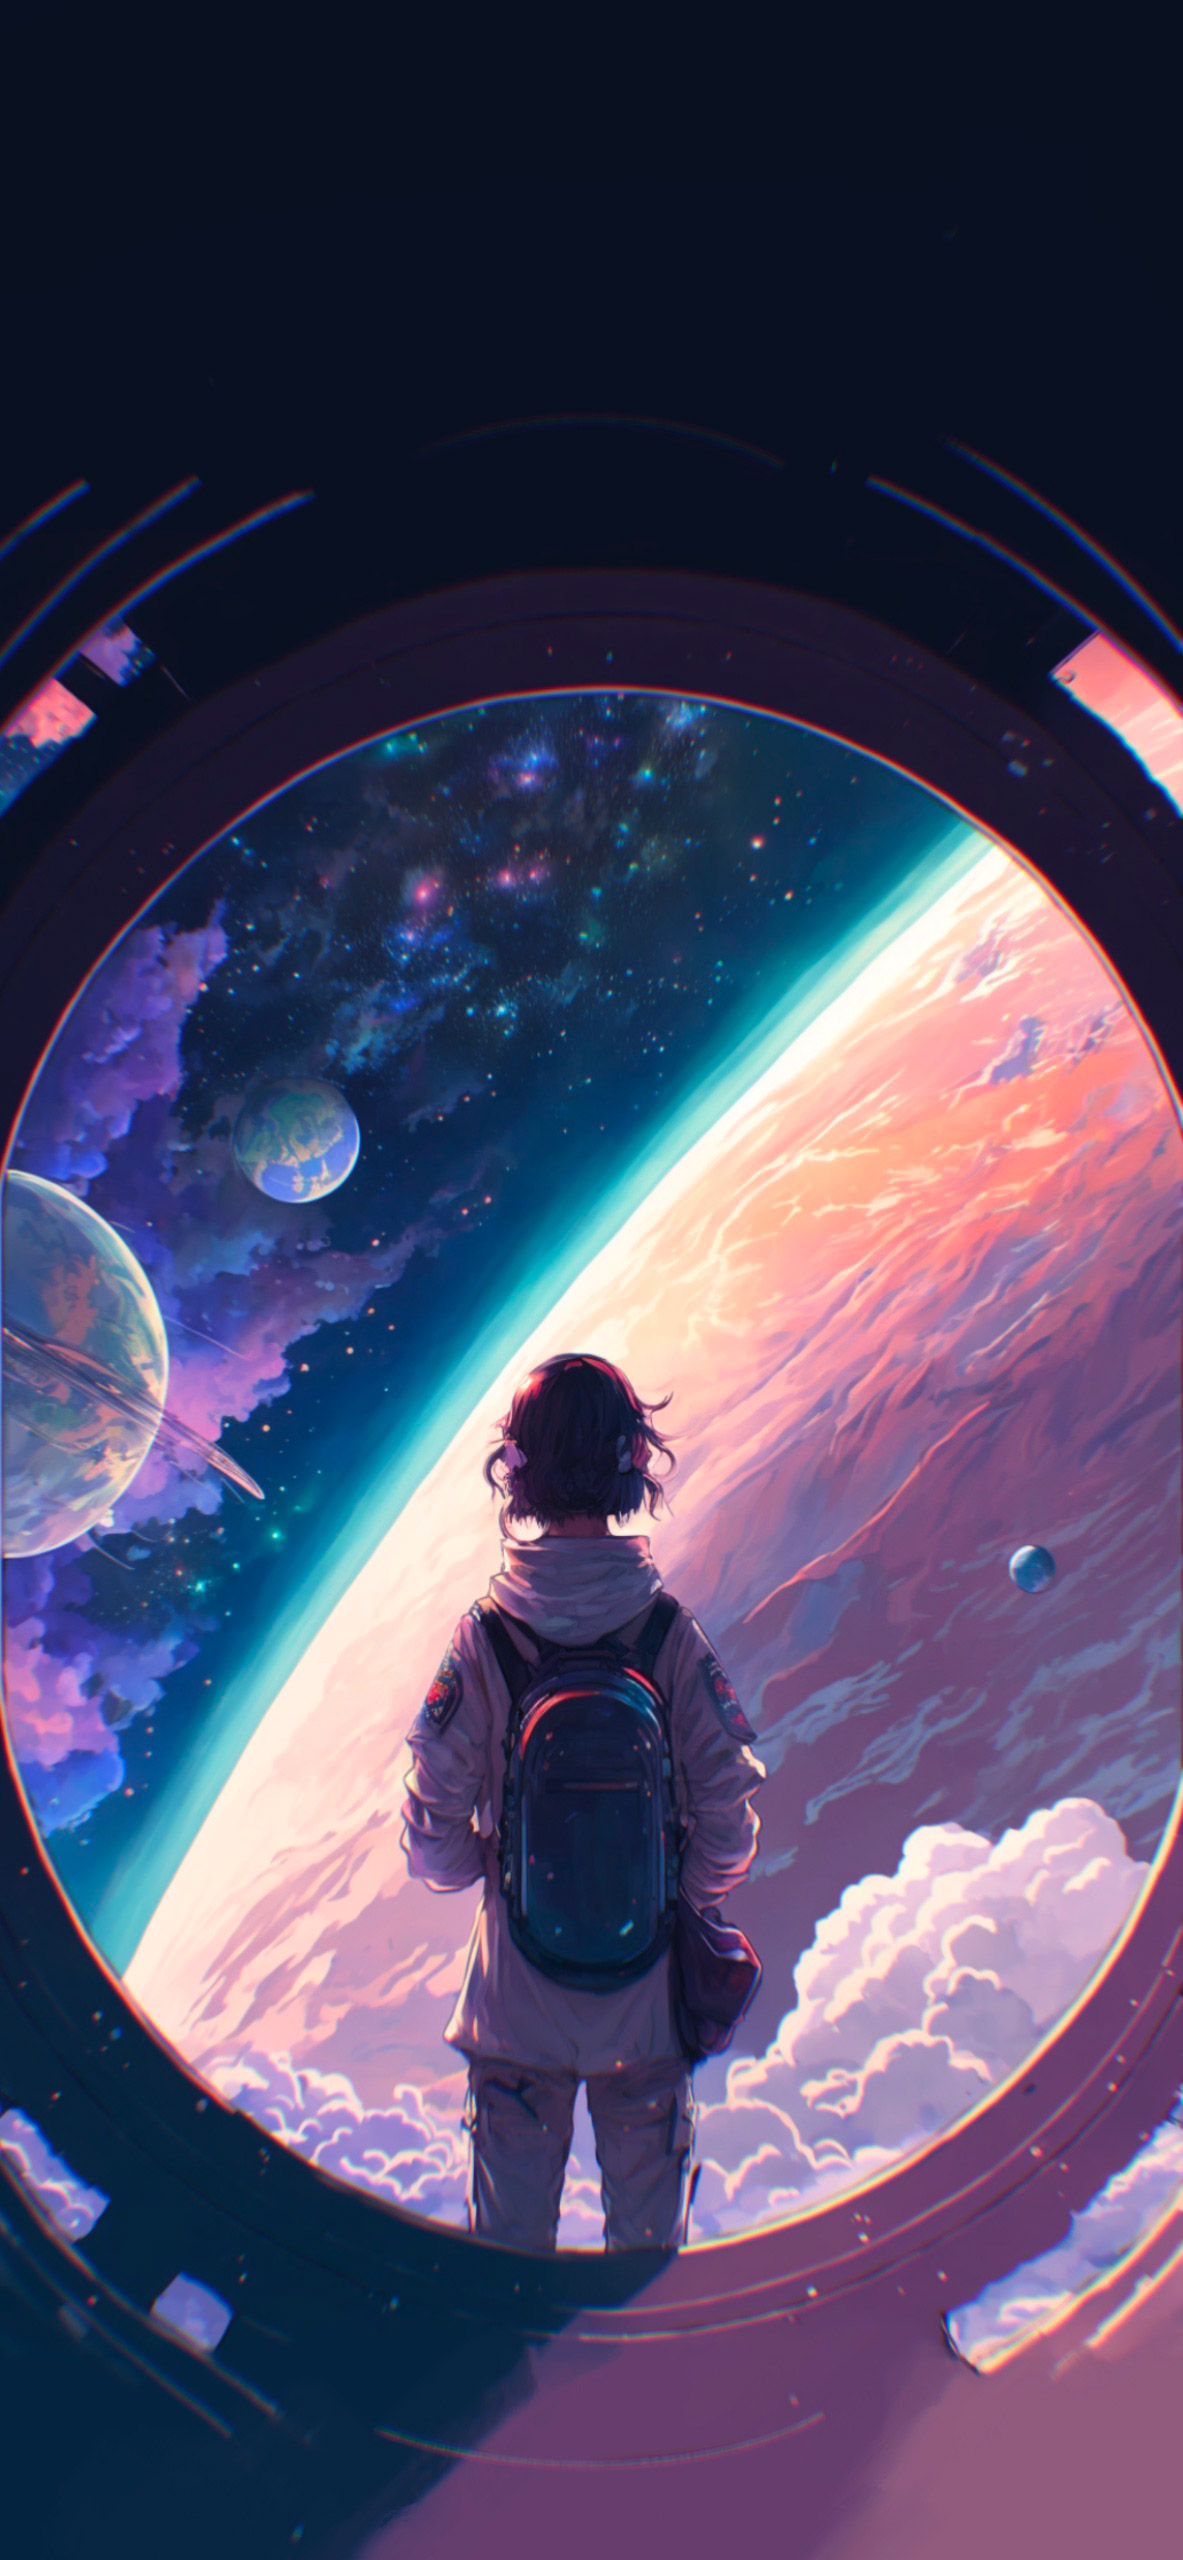 outer space wallpaper